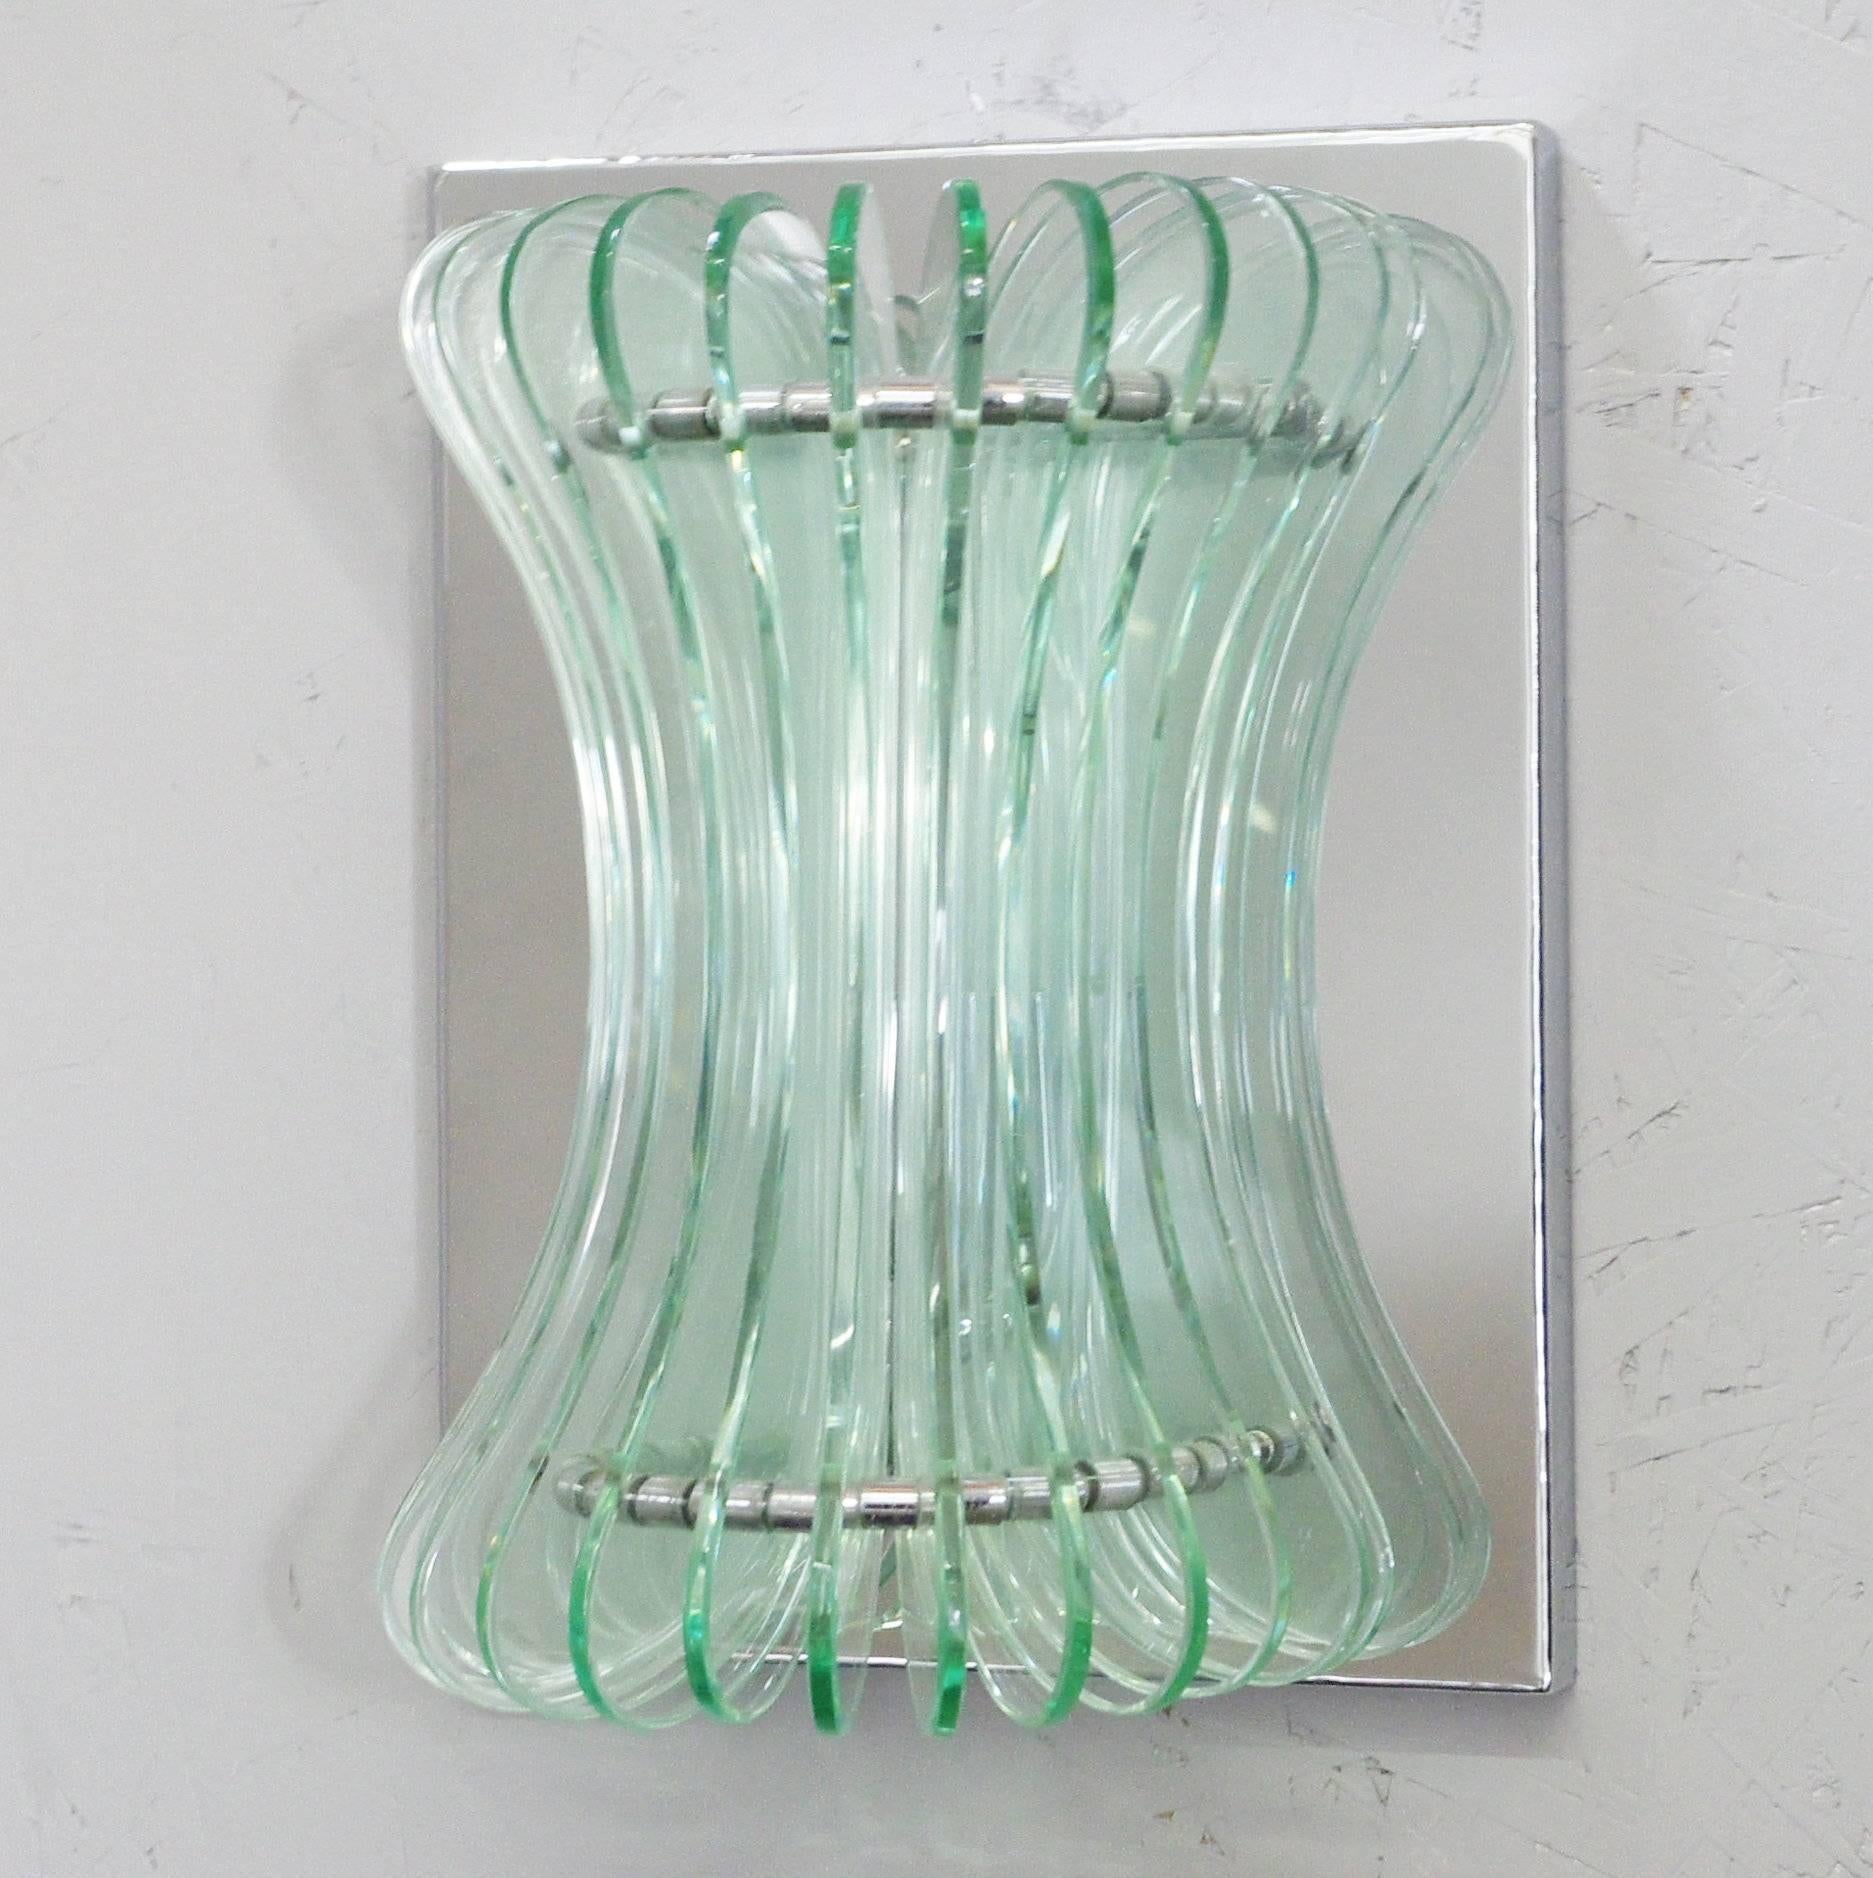 Pair of Vintage Italian Sconces w/ Beveled Glass Designed by Cristal Arte, 1960s For Sale 4